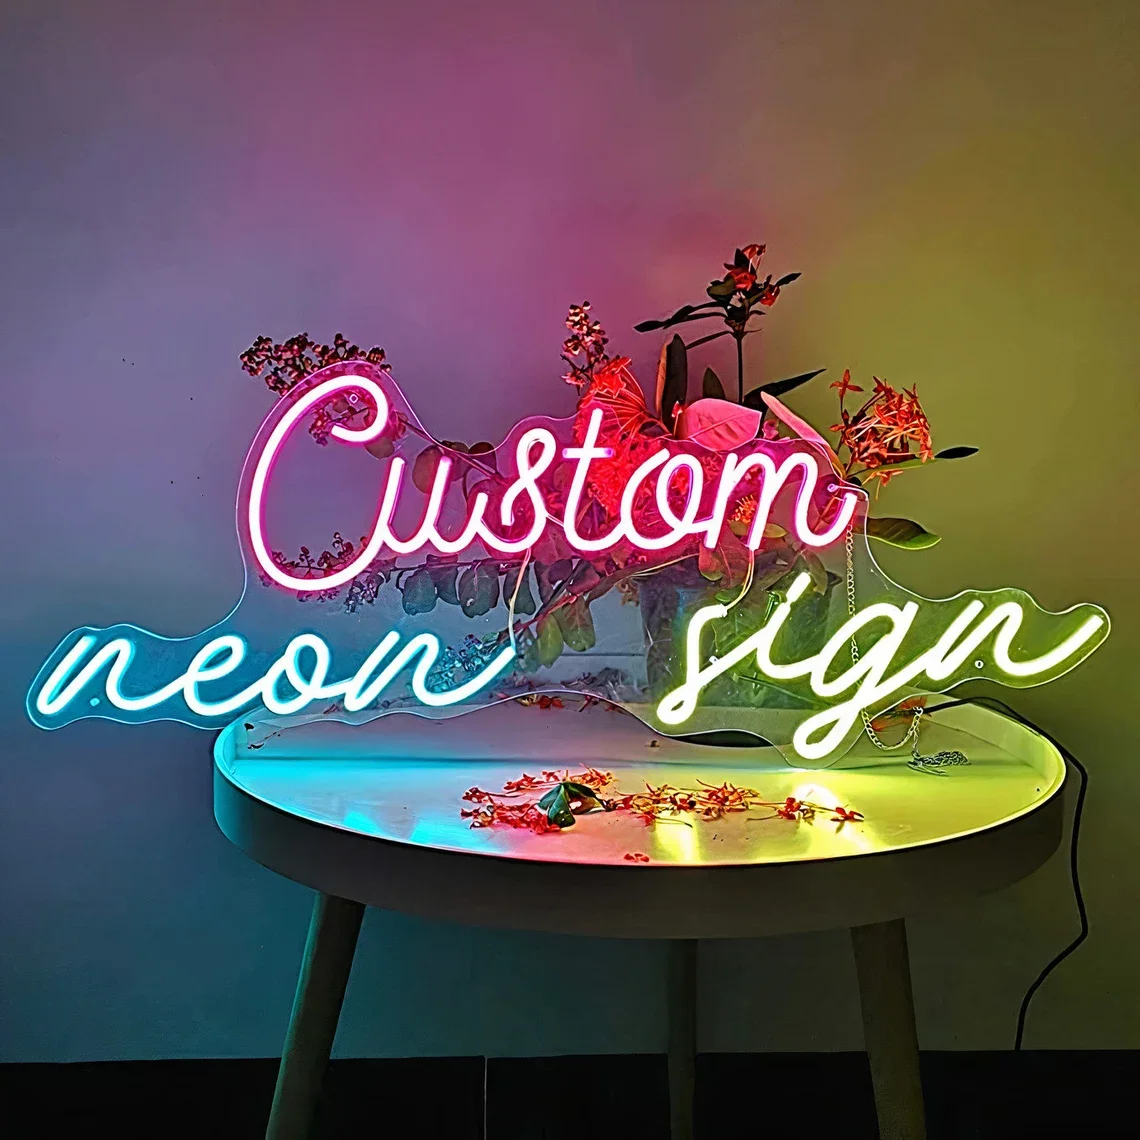 Custom Neon Signs, Personalized Led Neon Lights Sign,Neon Sign Customizable  for Wall Decor Wedding Birthday Party Bedroom Bar Shop Name Logo Lights